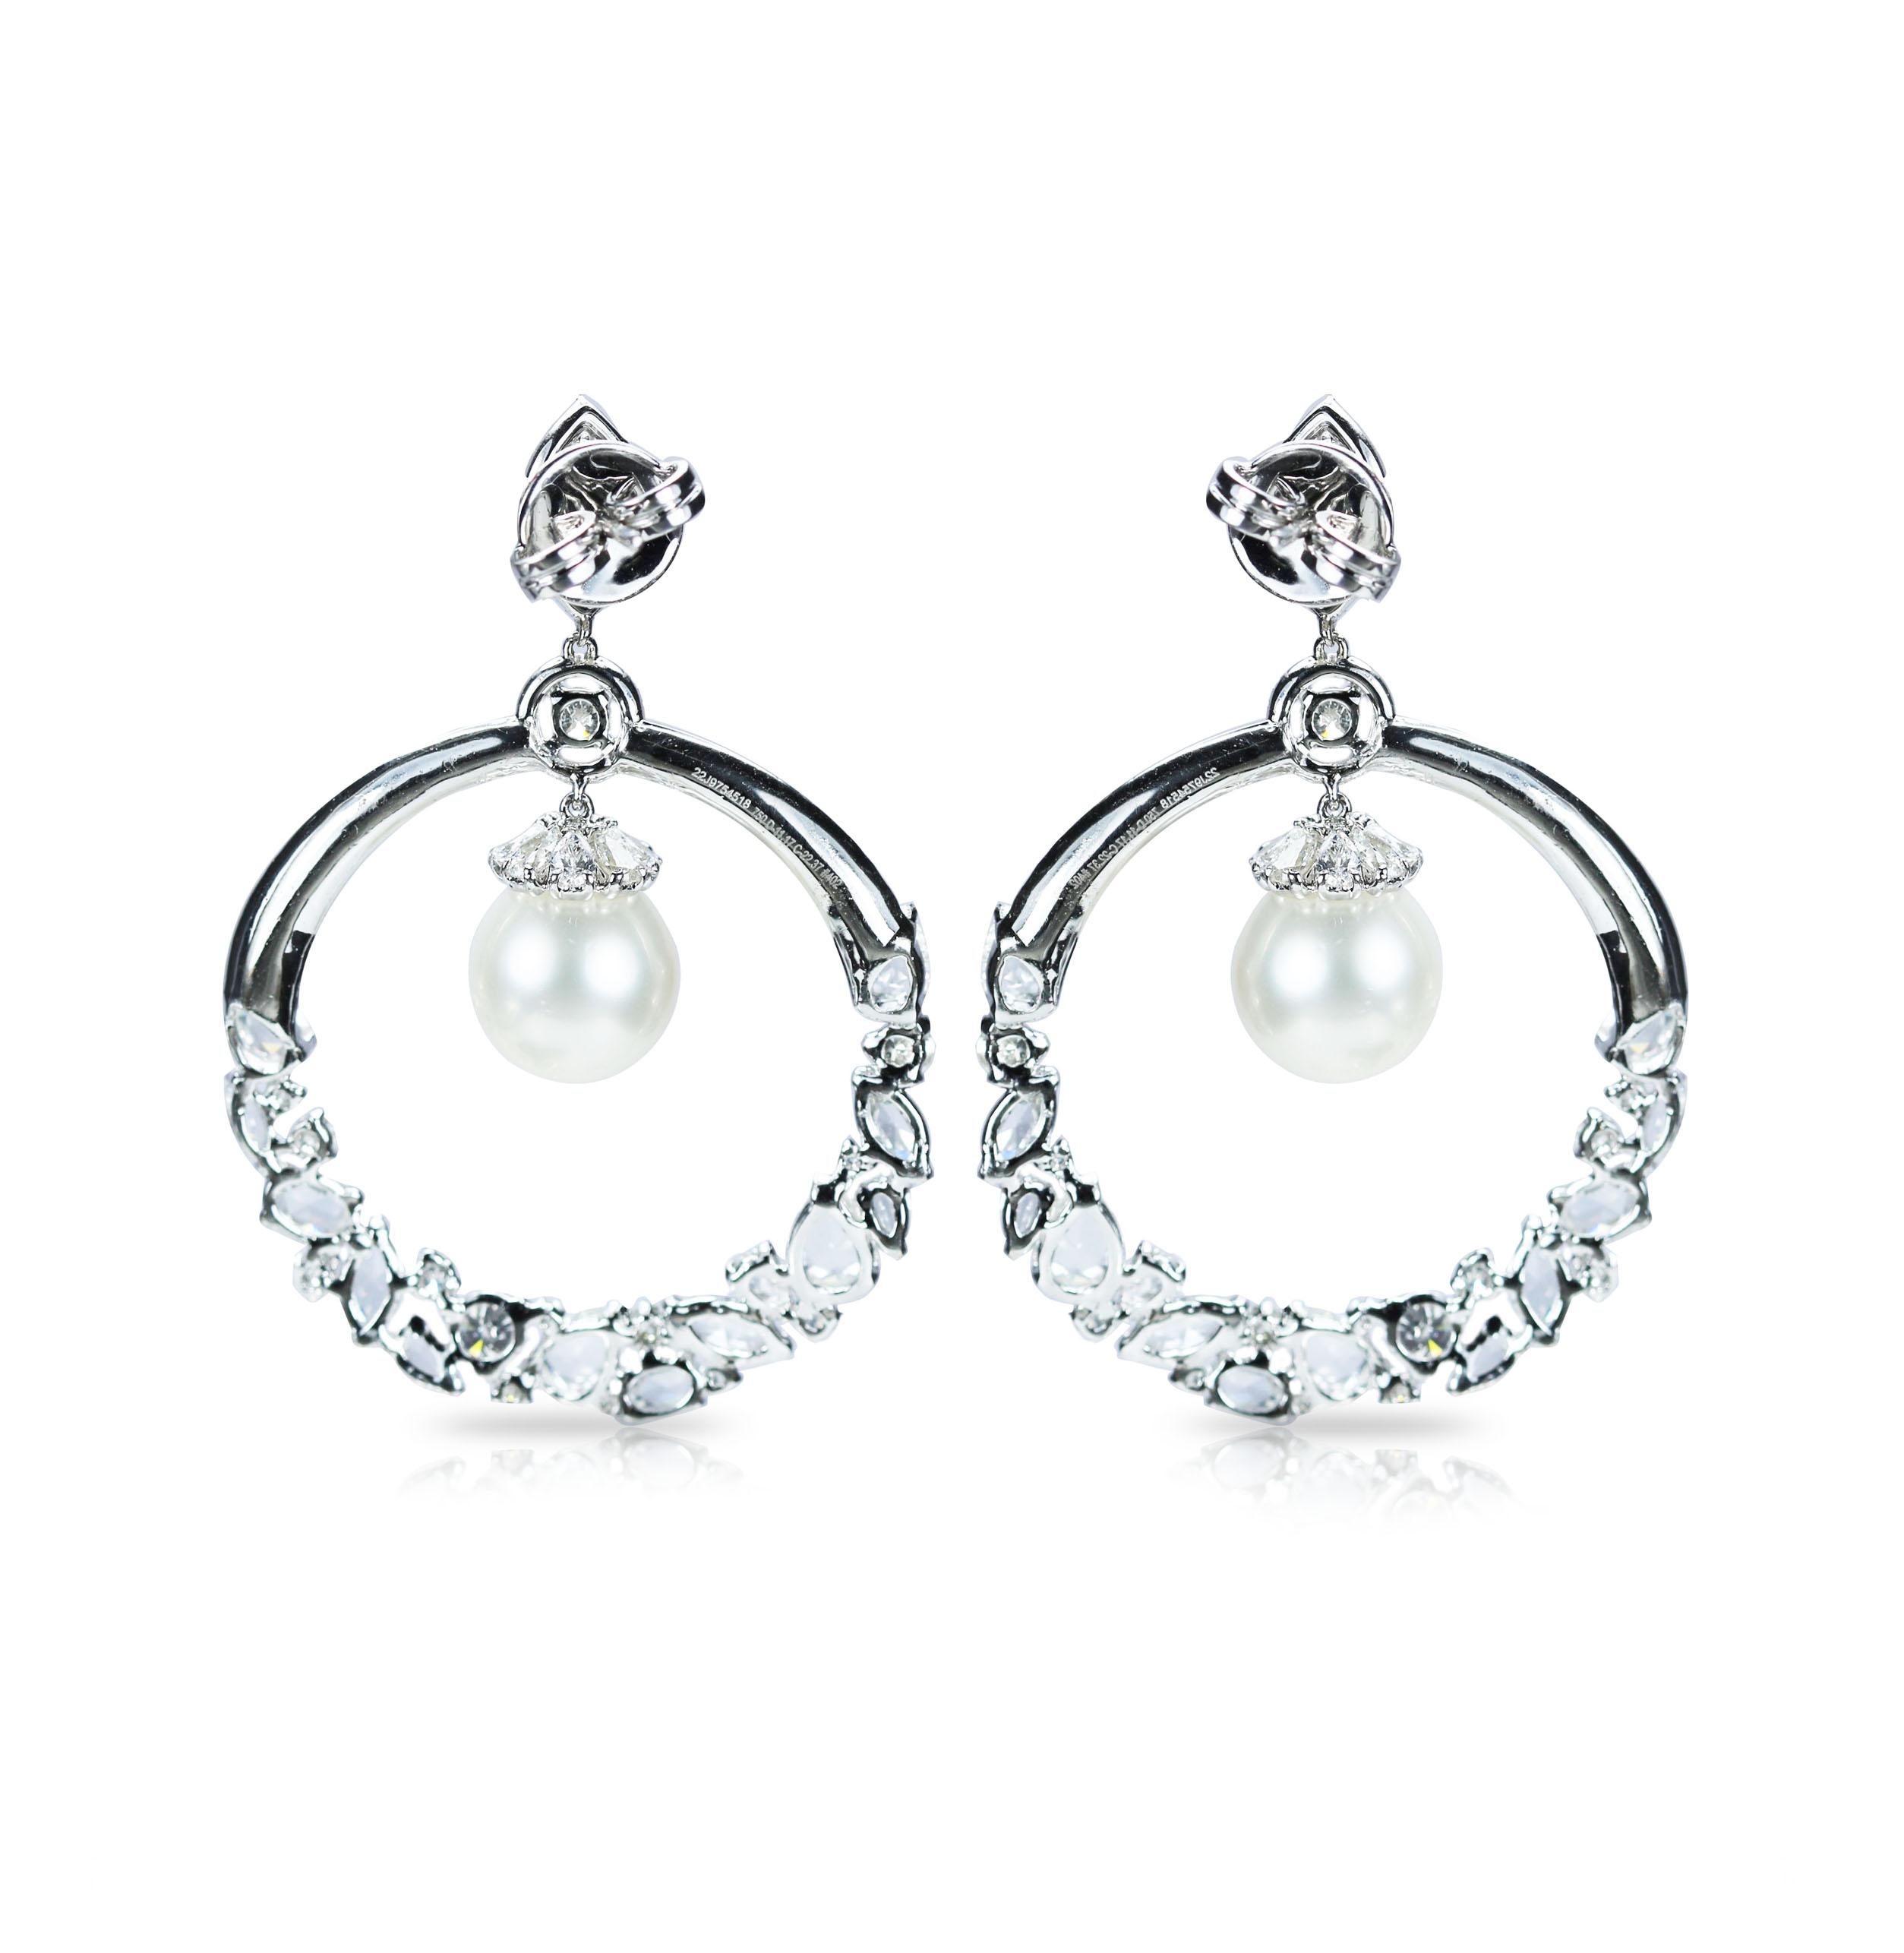 F-G-H/ VS-SI brilliant cut and rosecut diamonds and south sea pearls earrings
Frost yourself with our pièce de résistance in 18K white gold featuring F-G-H/ VS-SI brilliant cut and rose cut diamonds, with delicate south sea pearls to enhance its